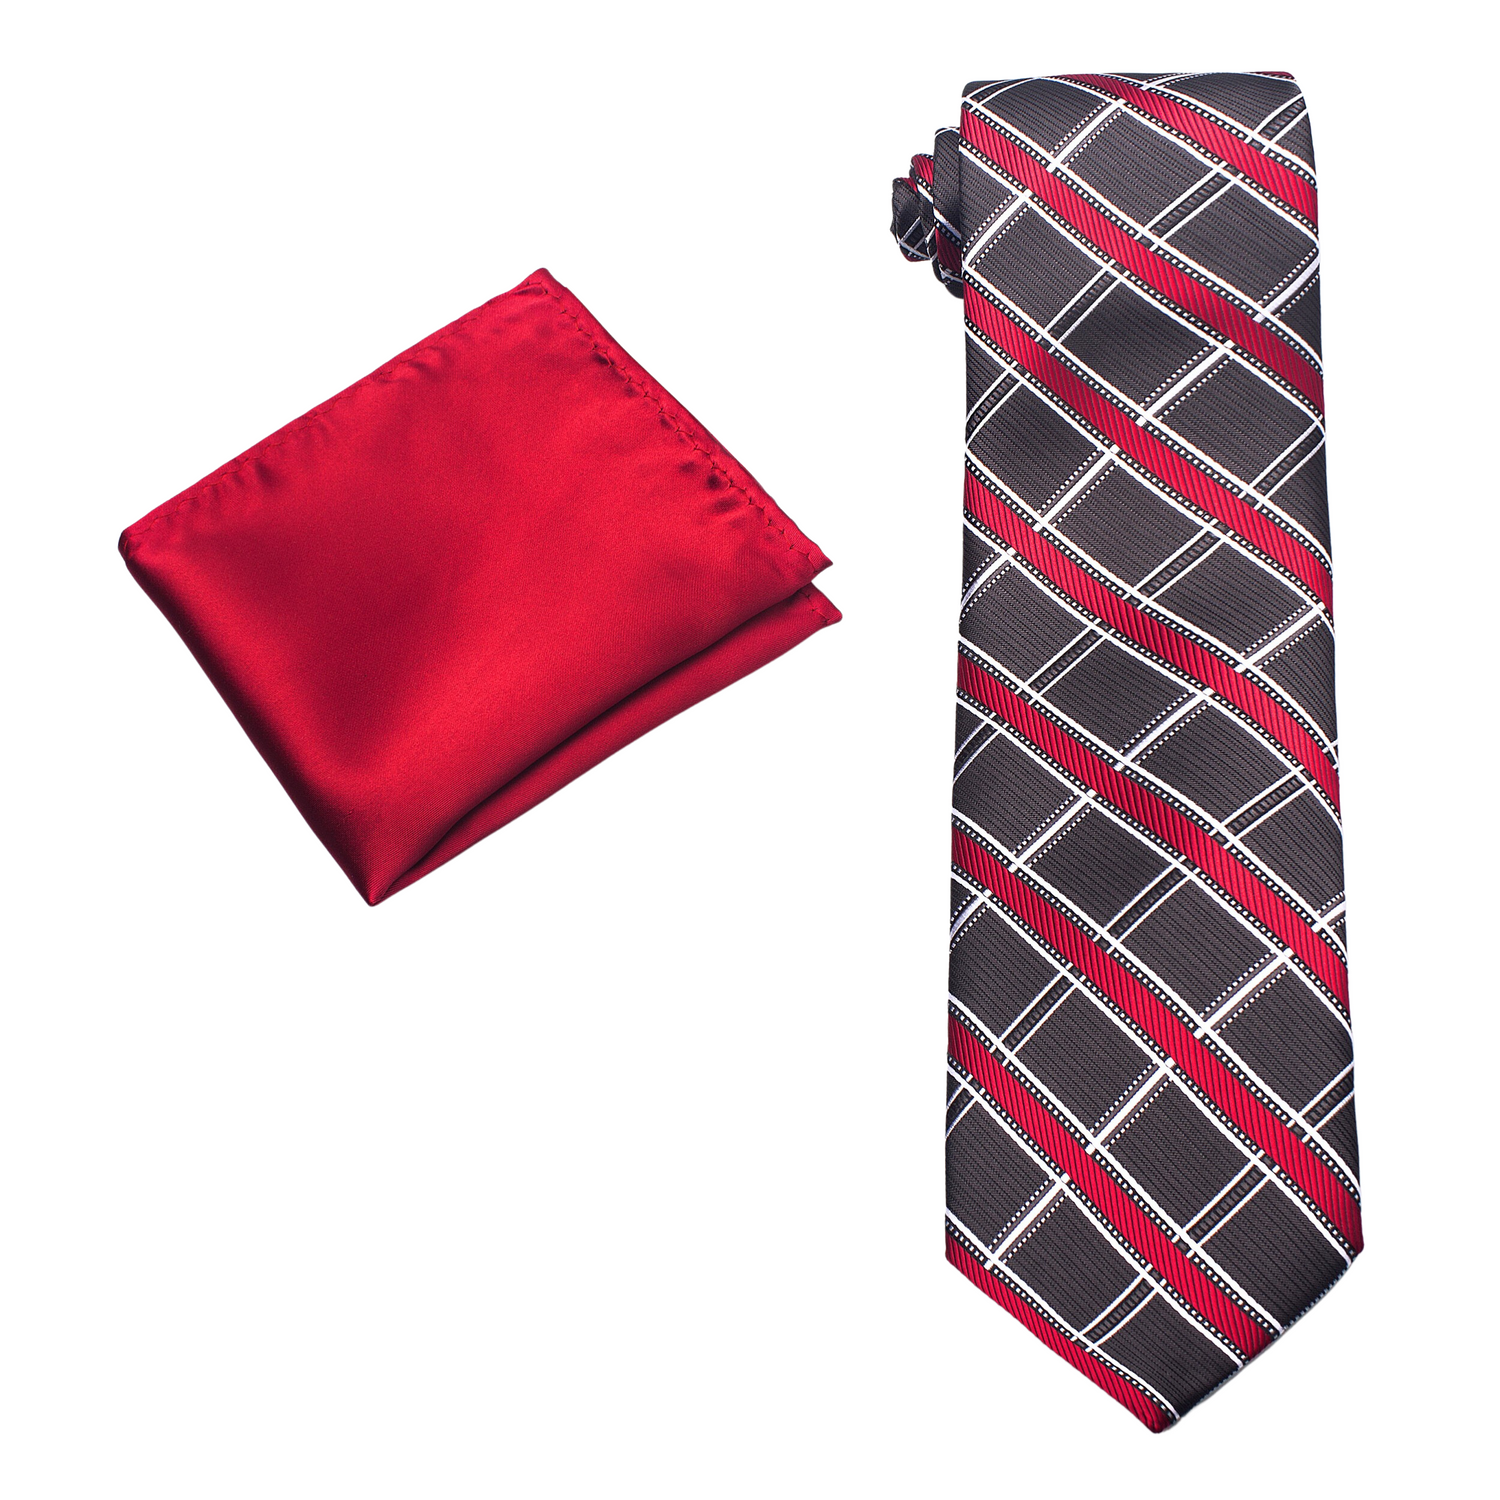 Alt View: Greyish Brown, Red, White Plaid Tie and Red Square